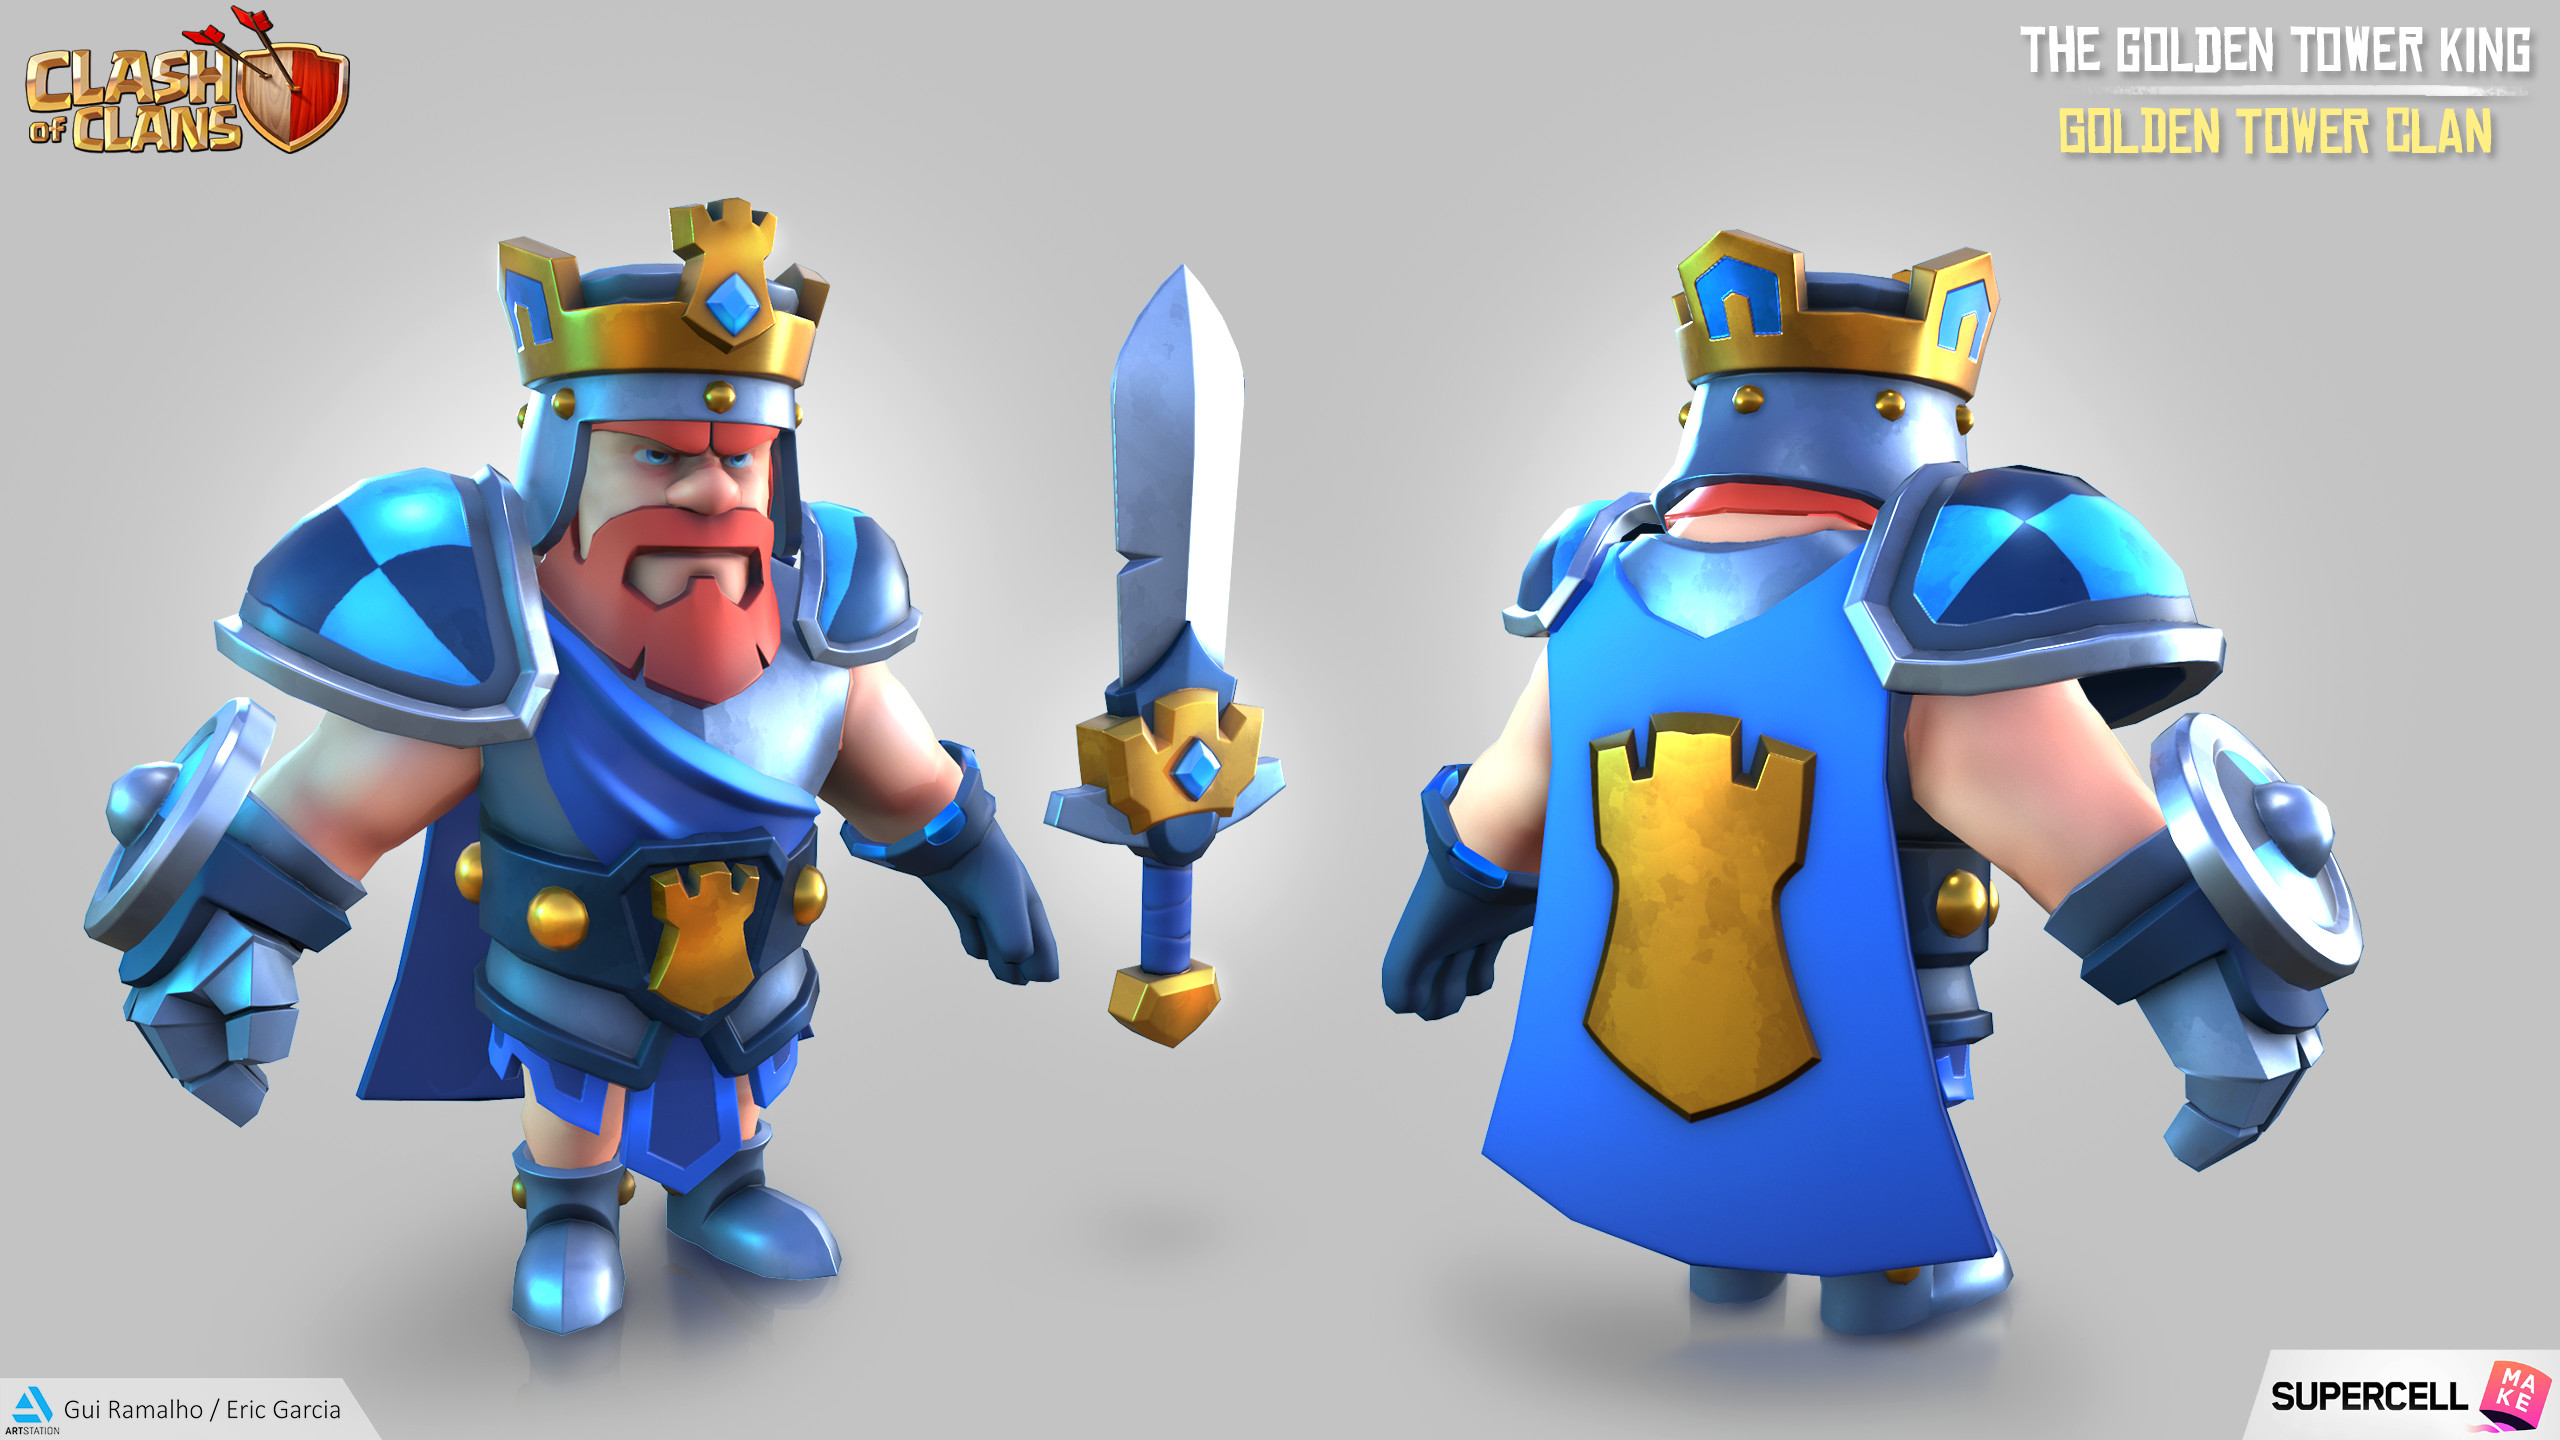 Gui Ramalho - The Golden Tower King - Clash of Clans - Supercell Make skin  contest